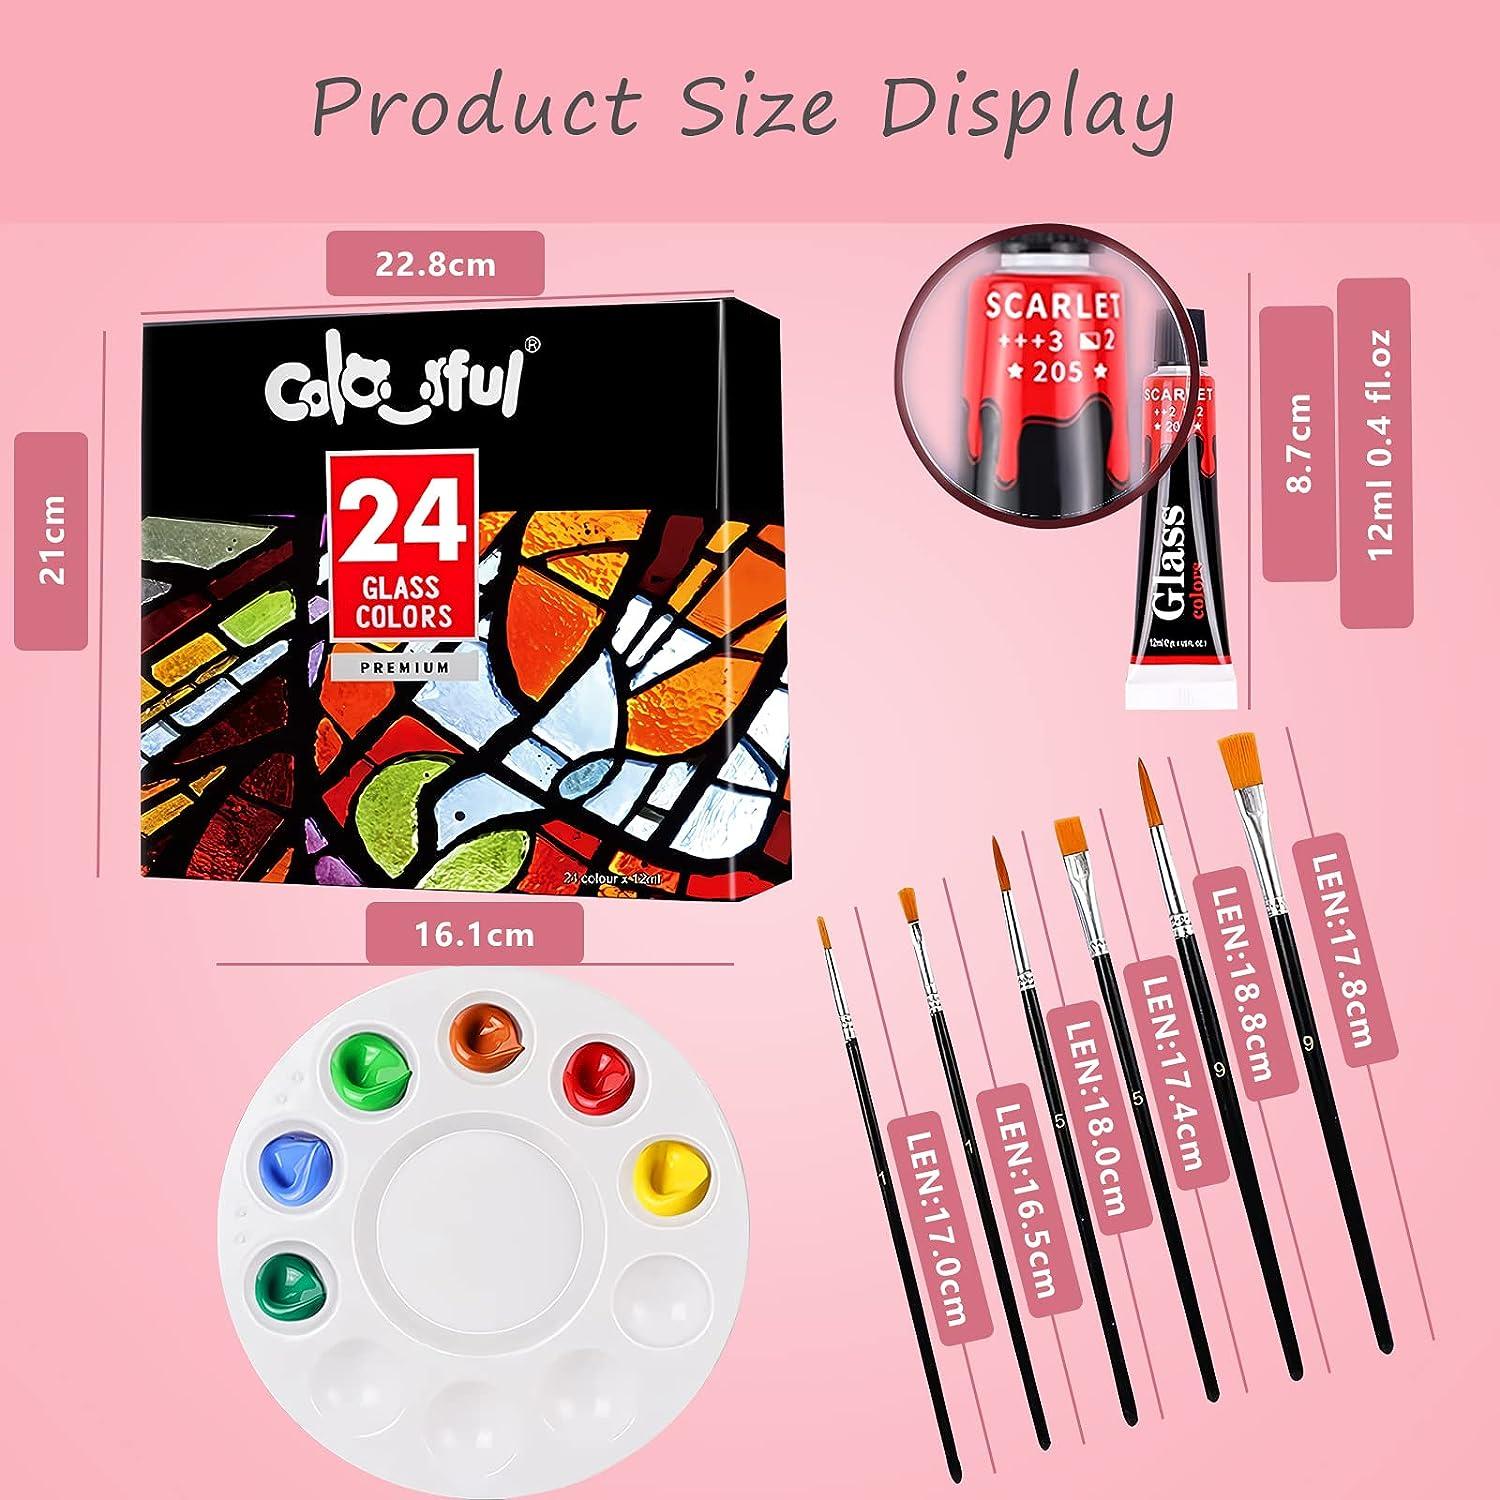 Painting Supplies 12 Stain Glass Paint Set With 6 Nylon Brushes 1 Palette  Waterproof Acrylic Enamel Kit For Kids 230706 From Mu007, $12.65